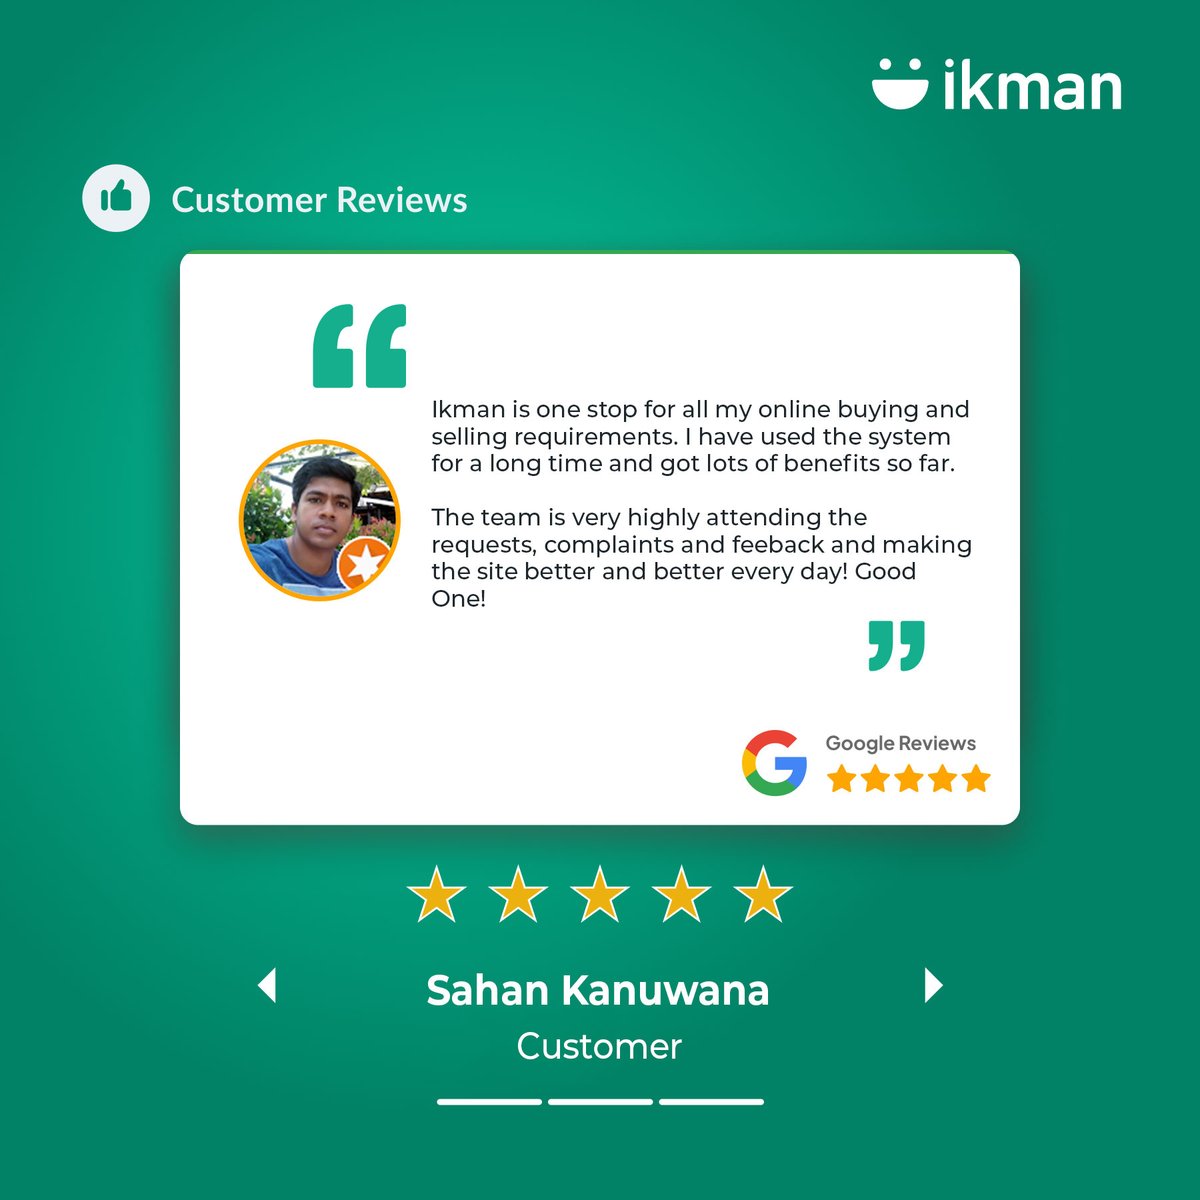 Yet another outstanding 5-star review! 🌟
We're deeply grateful for the sincere feedback from our valued customers, which drives us to constantly enhance our service standards and exceed expectations every day! 🙏❤️
#ikman #reviews #customerservice #customerfeedback